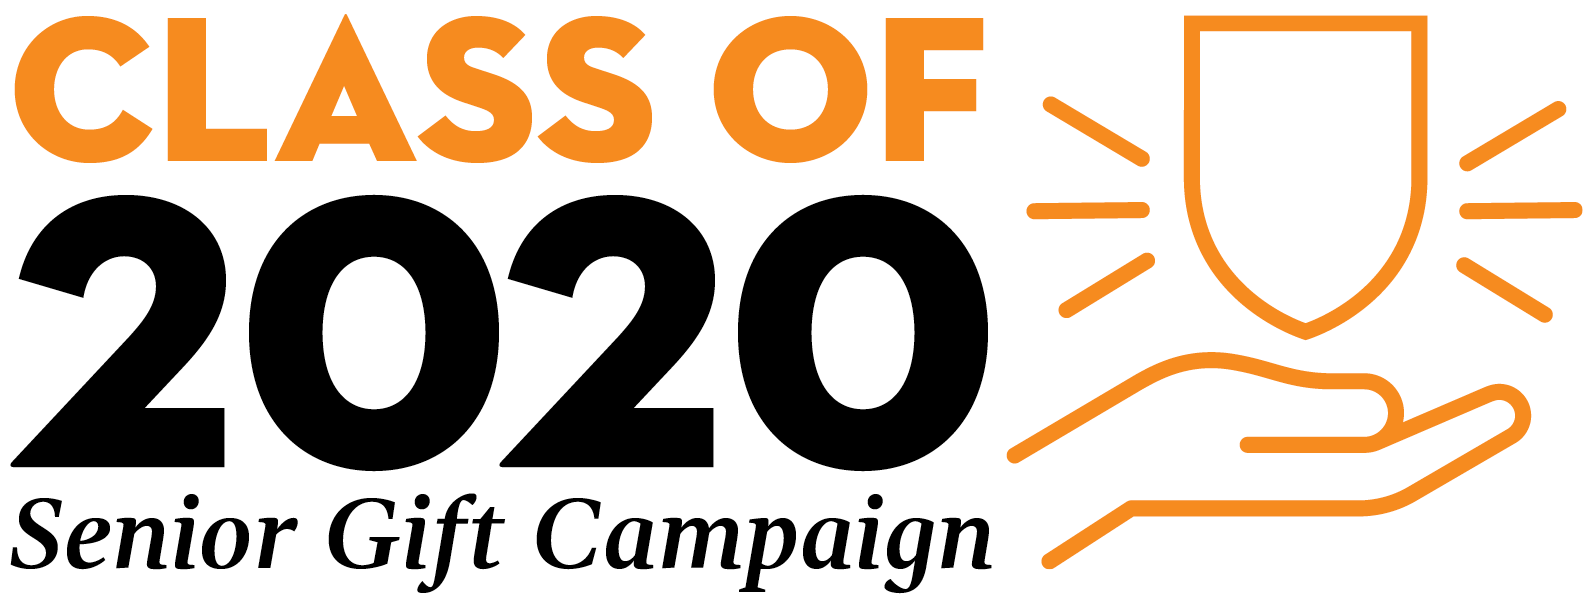 Class of 2020 Senior Gift Campaign